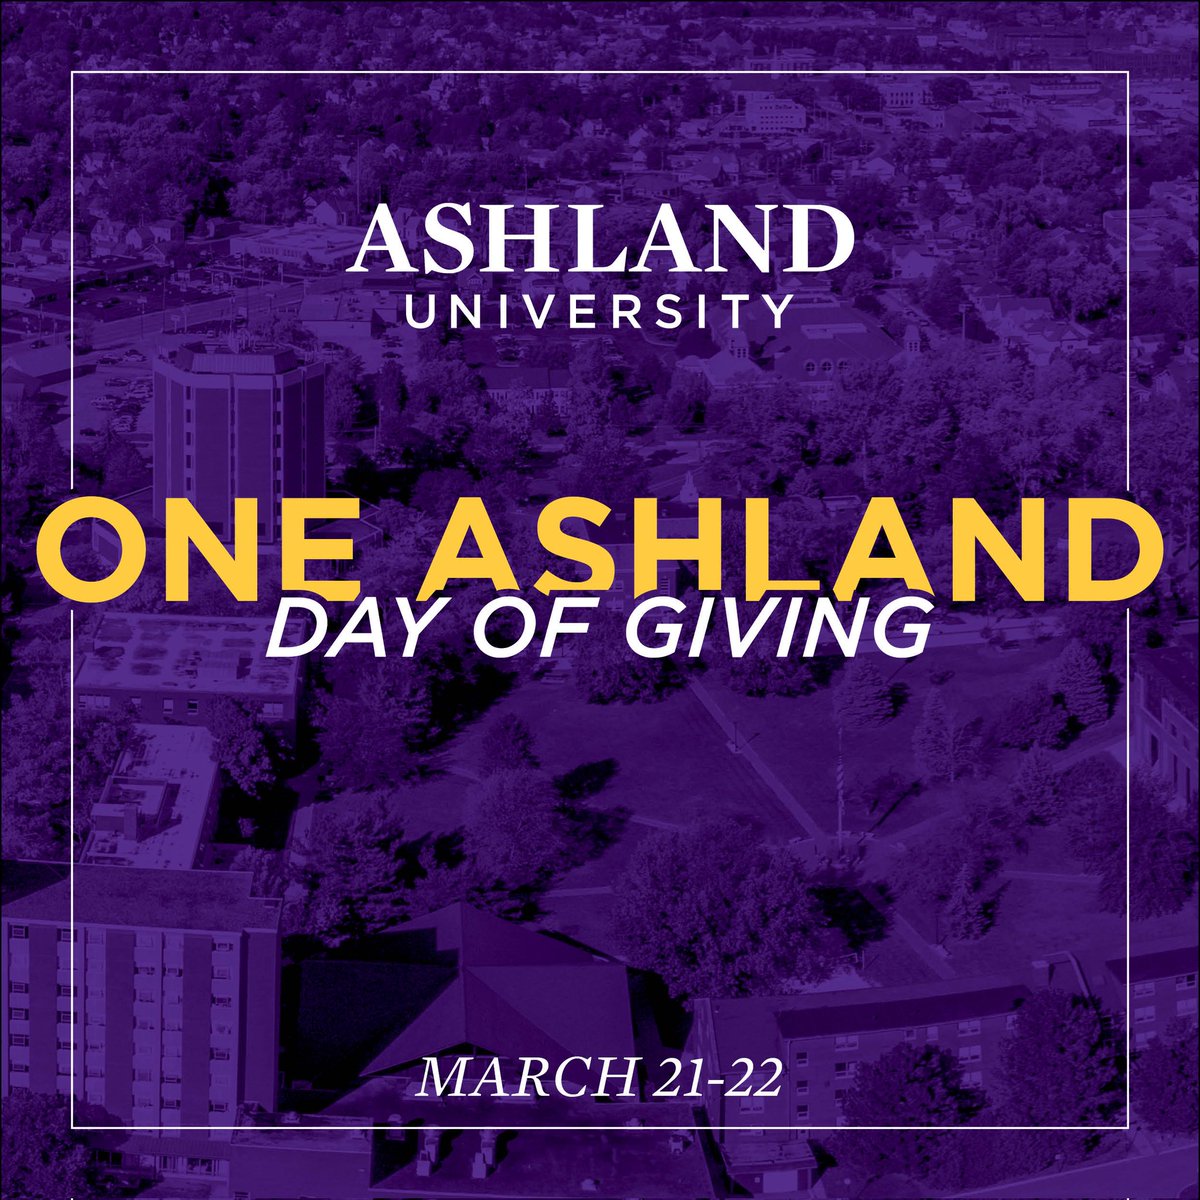 Day of Giving starts tomorrow! Look out for videos across departments to learn more about how you can help advance and grow Eagle Nation! advancement.ashland.edu/oneashland